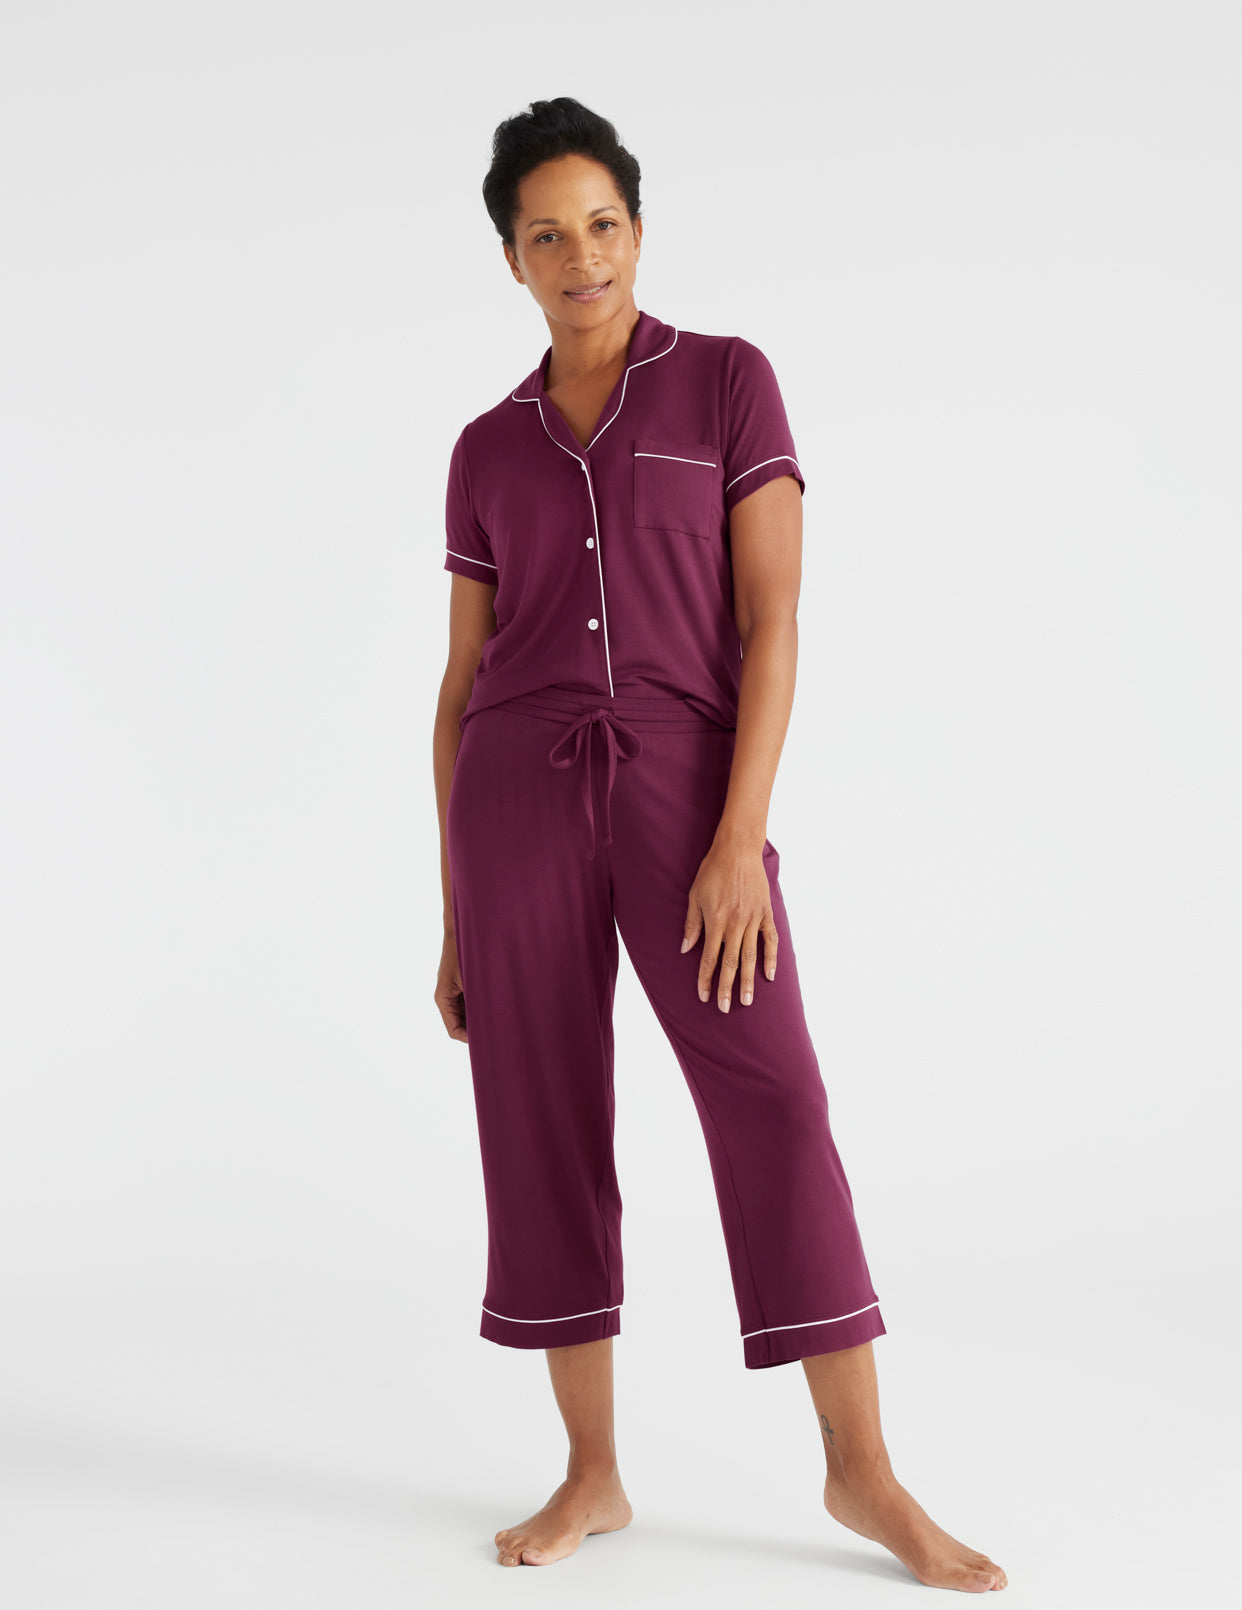 Stacey has 37.5" hips and wears a Knix size M color:winterberry